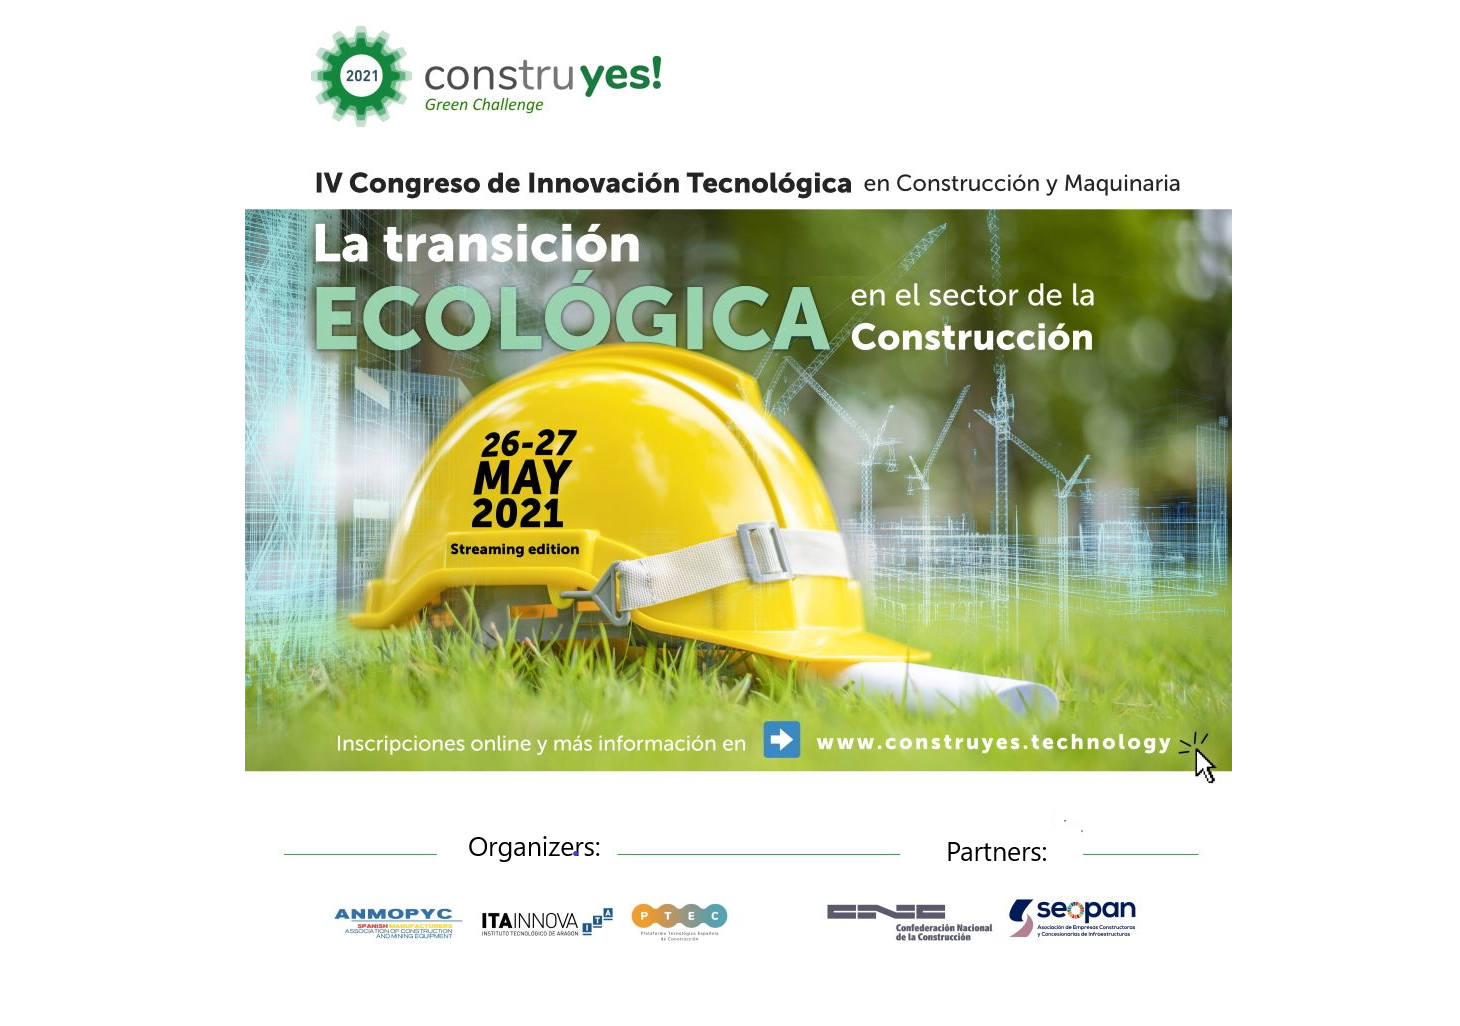 Congress on Technological Innovation: construyes!